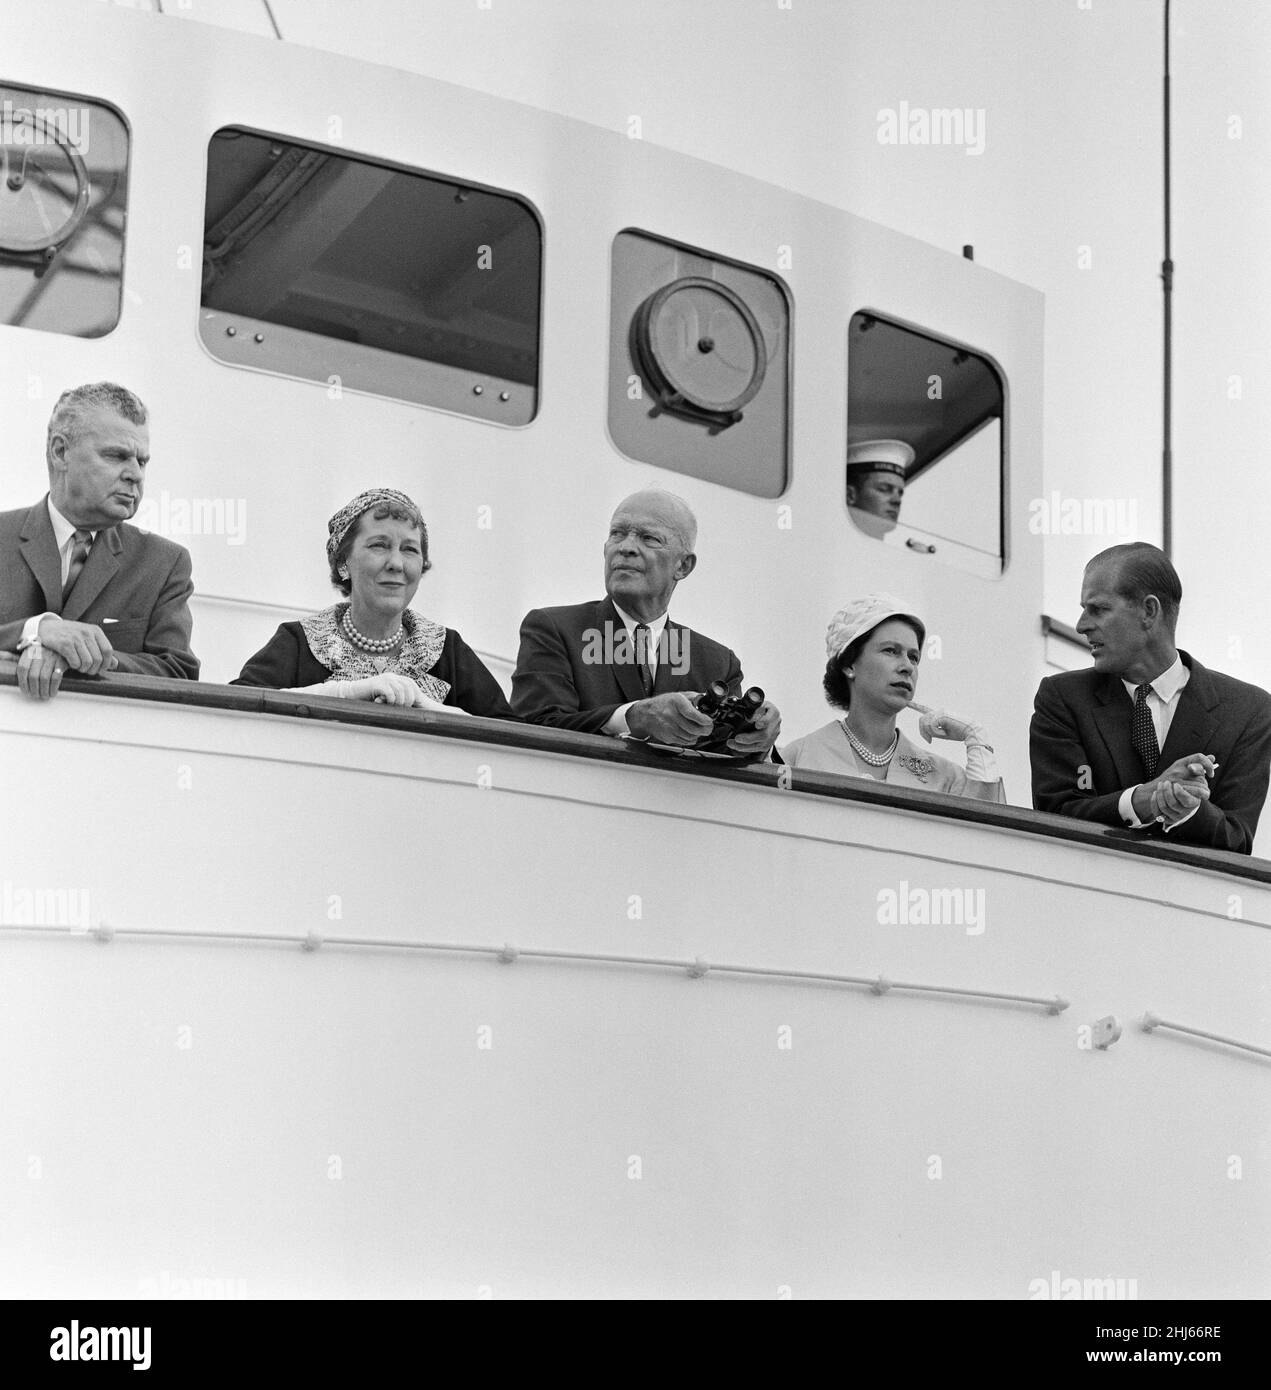 Queen Elizabeth II and The Duke of Edinburgh pictured with President Eisenhower and his wife during the Royal tour of Canada. Montreal. 26th June 1959. Stock Photo